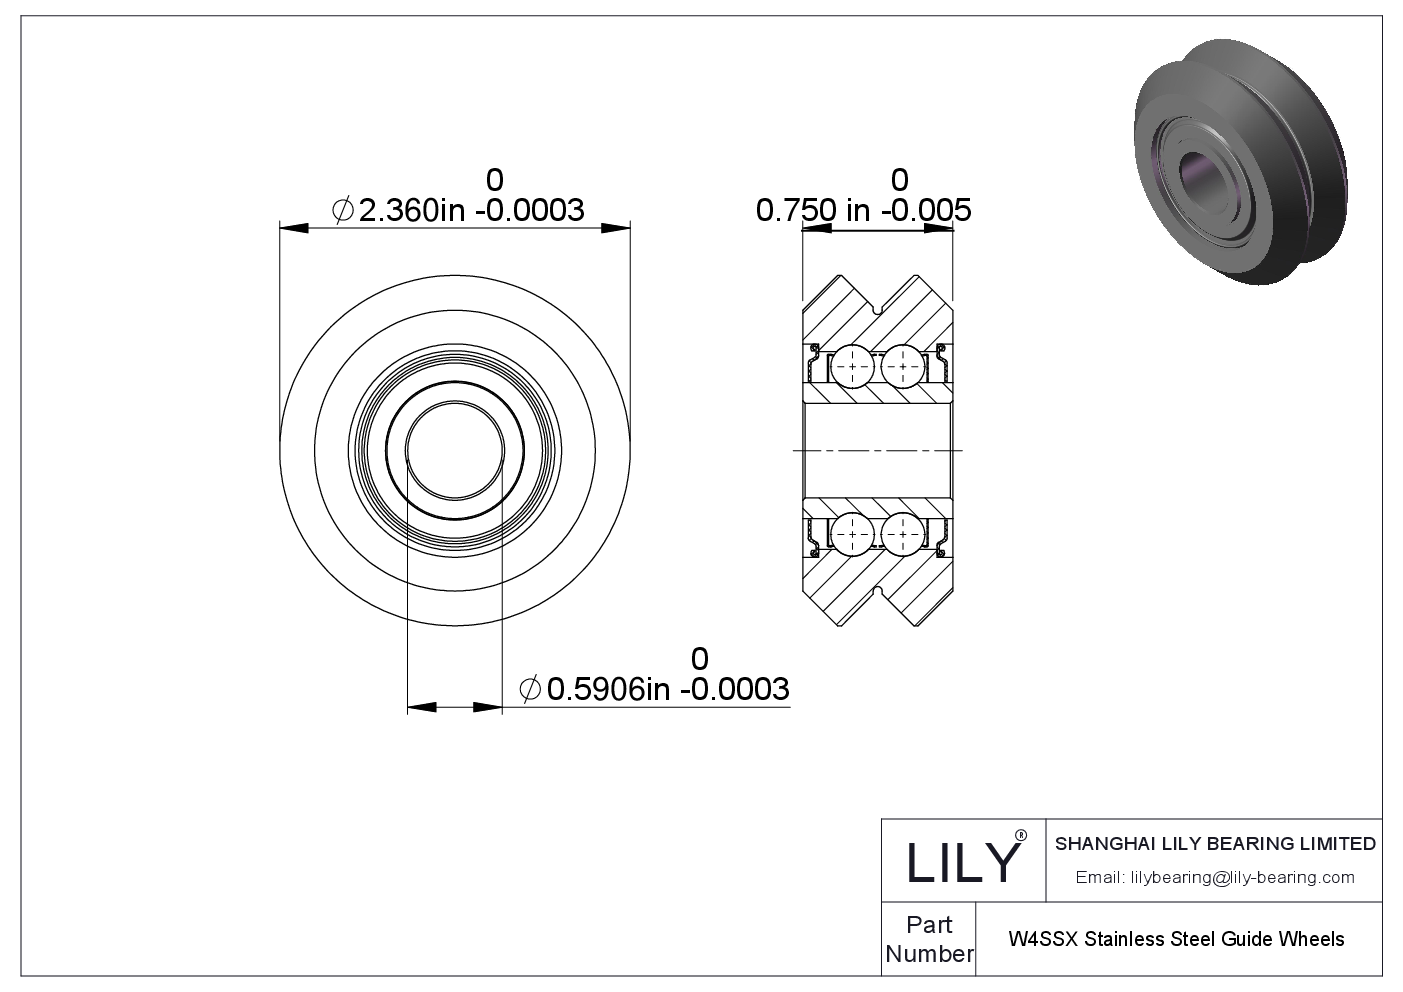 W4SSX Stainless Steel Guide Wheels cad drawing